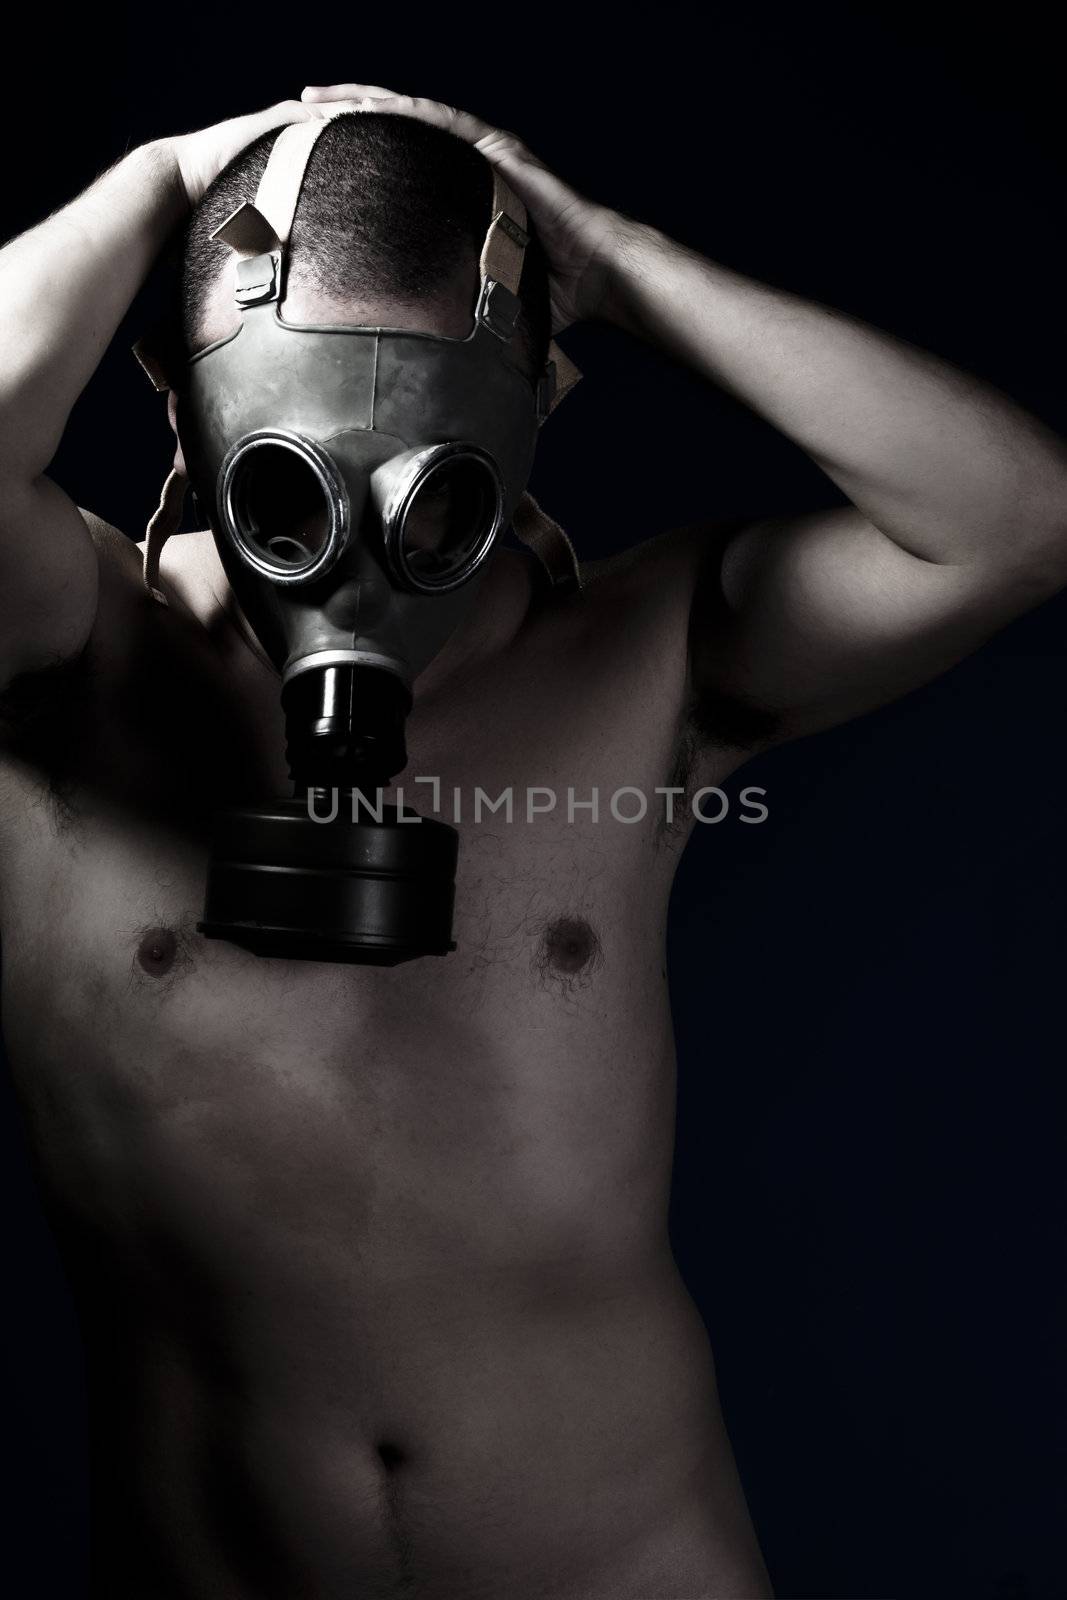 Naked man with protective gas mask, pain, fear, dark